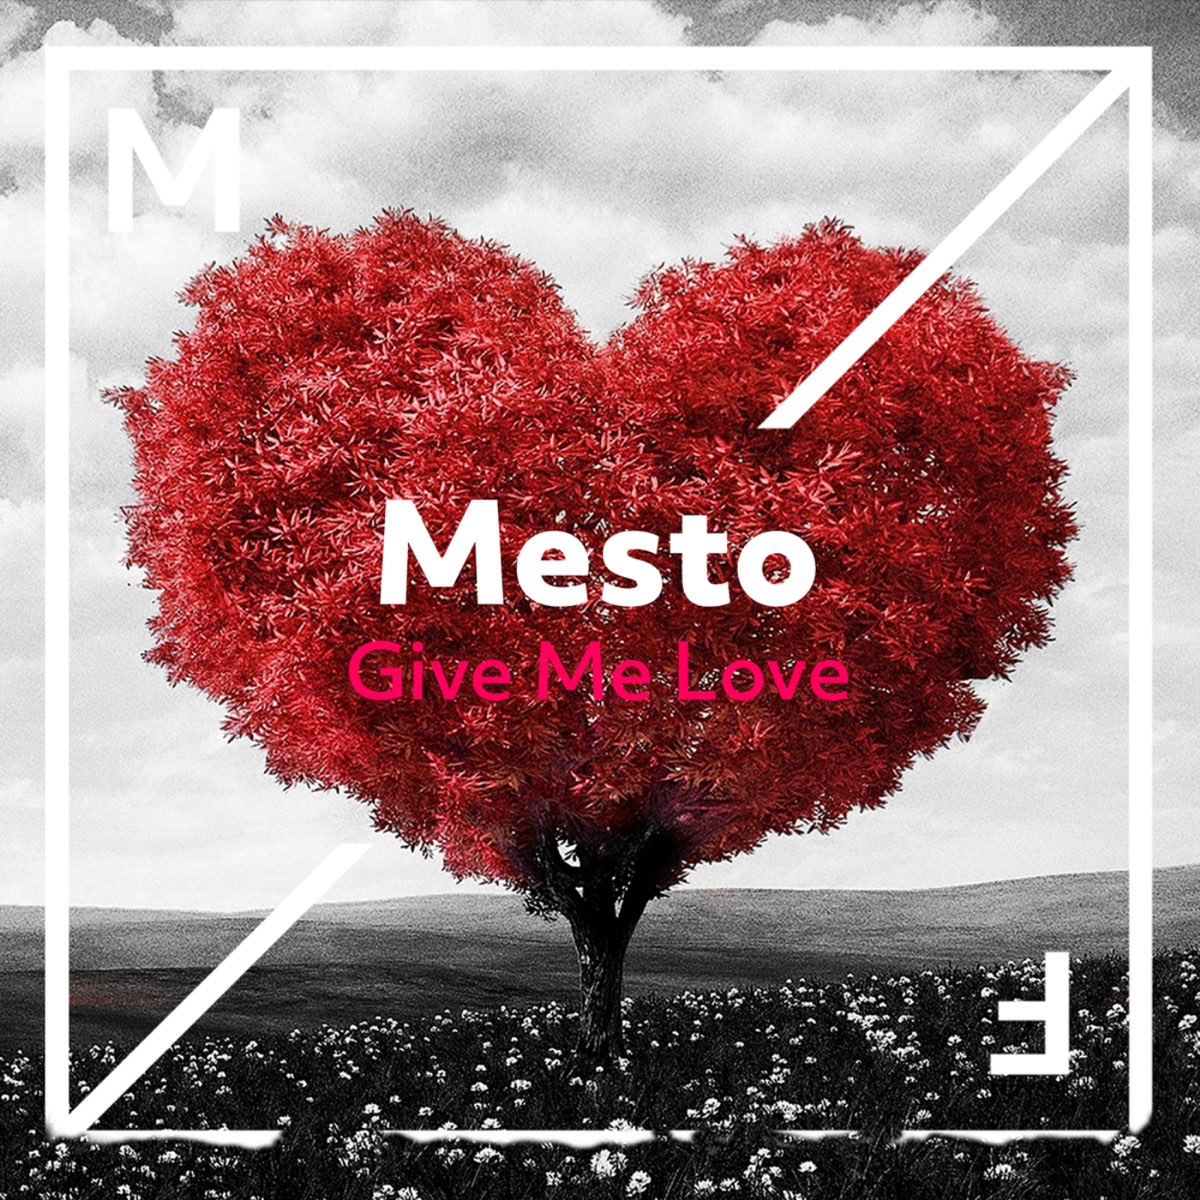 Give to me. Mesto - give me Love. Love место. Give me give me Love give me give me Love. ГИВ Лове.